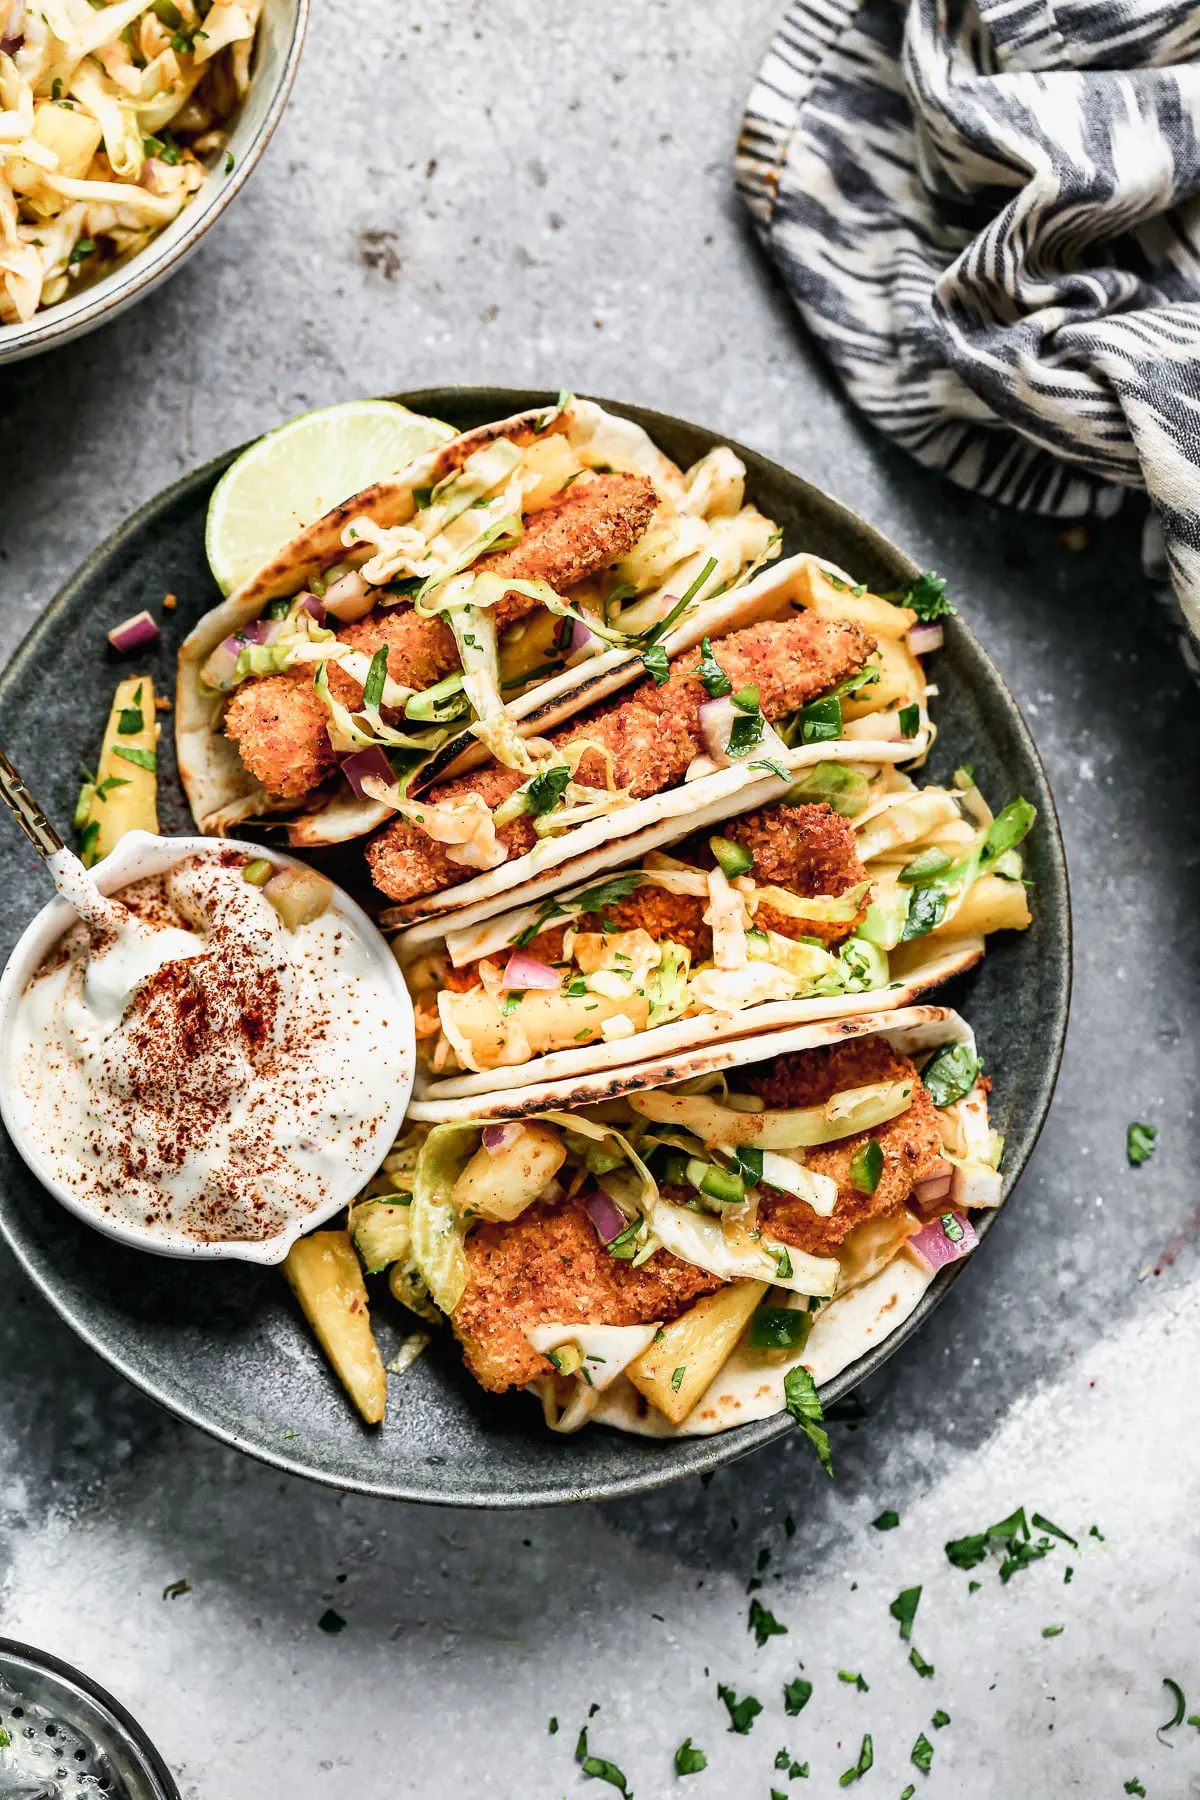 Never have a soggy fish taco again! Our Air Fryer Fish Tacos produce the CRISPIEST breaded fish without all the fat and calories and WITH all the flavor. We nestle the crunchy barramundi&nbsp;in charred street taco tortillas, top with a quick pineapple slaw, and a fresh squeeze of lime juice.&nbsp;